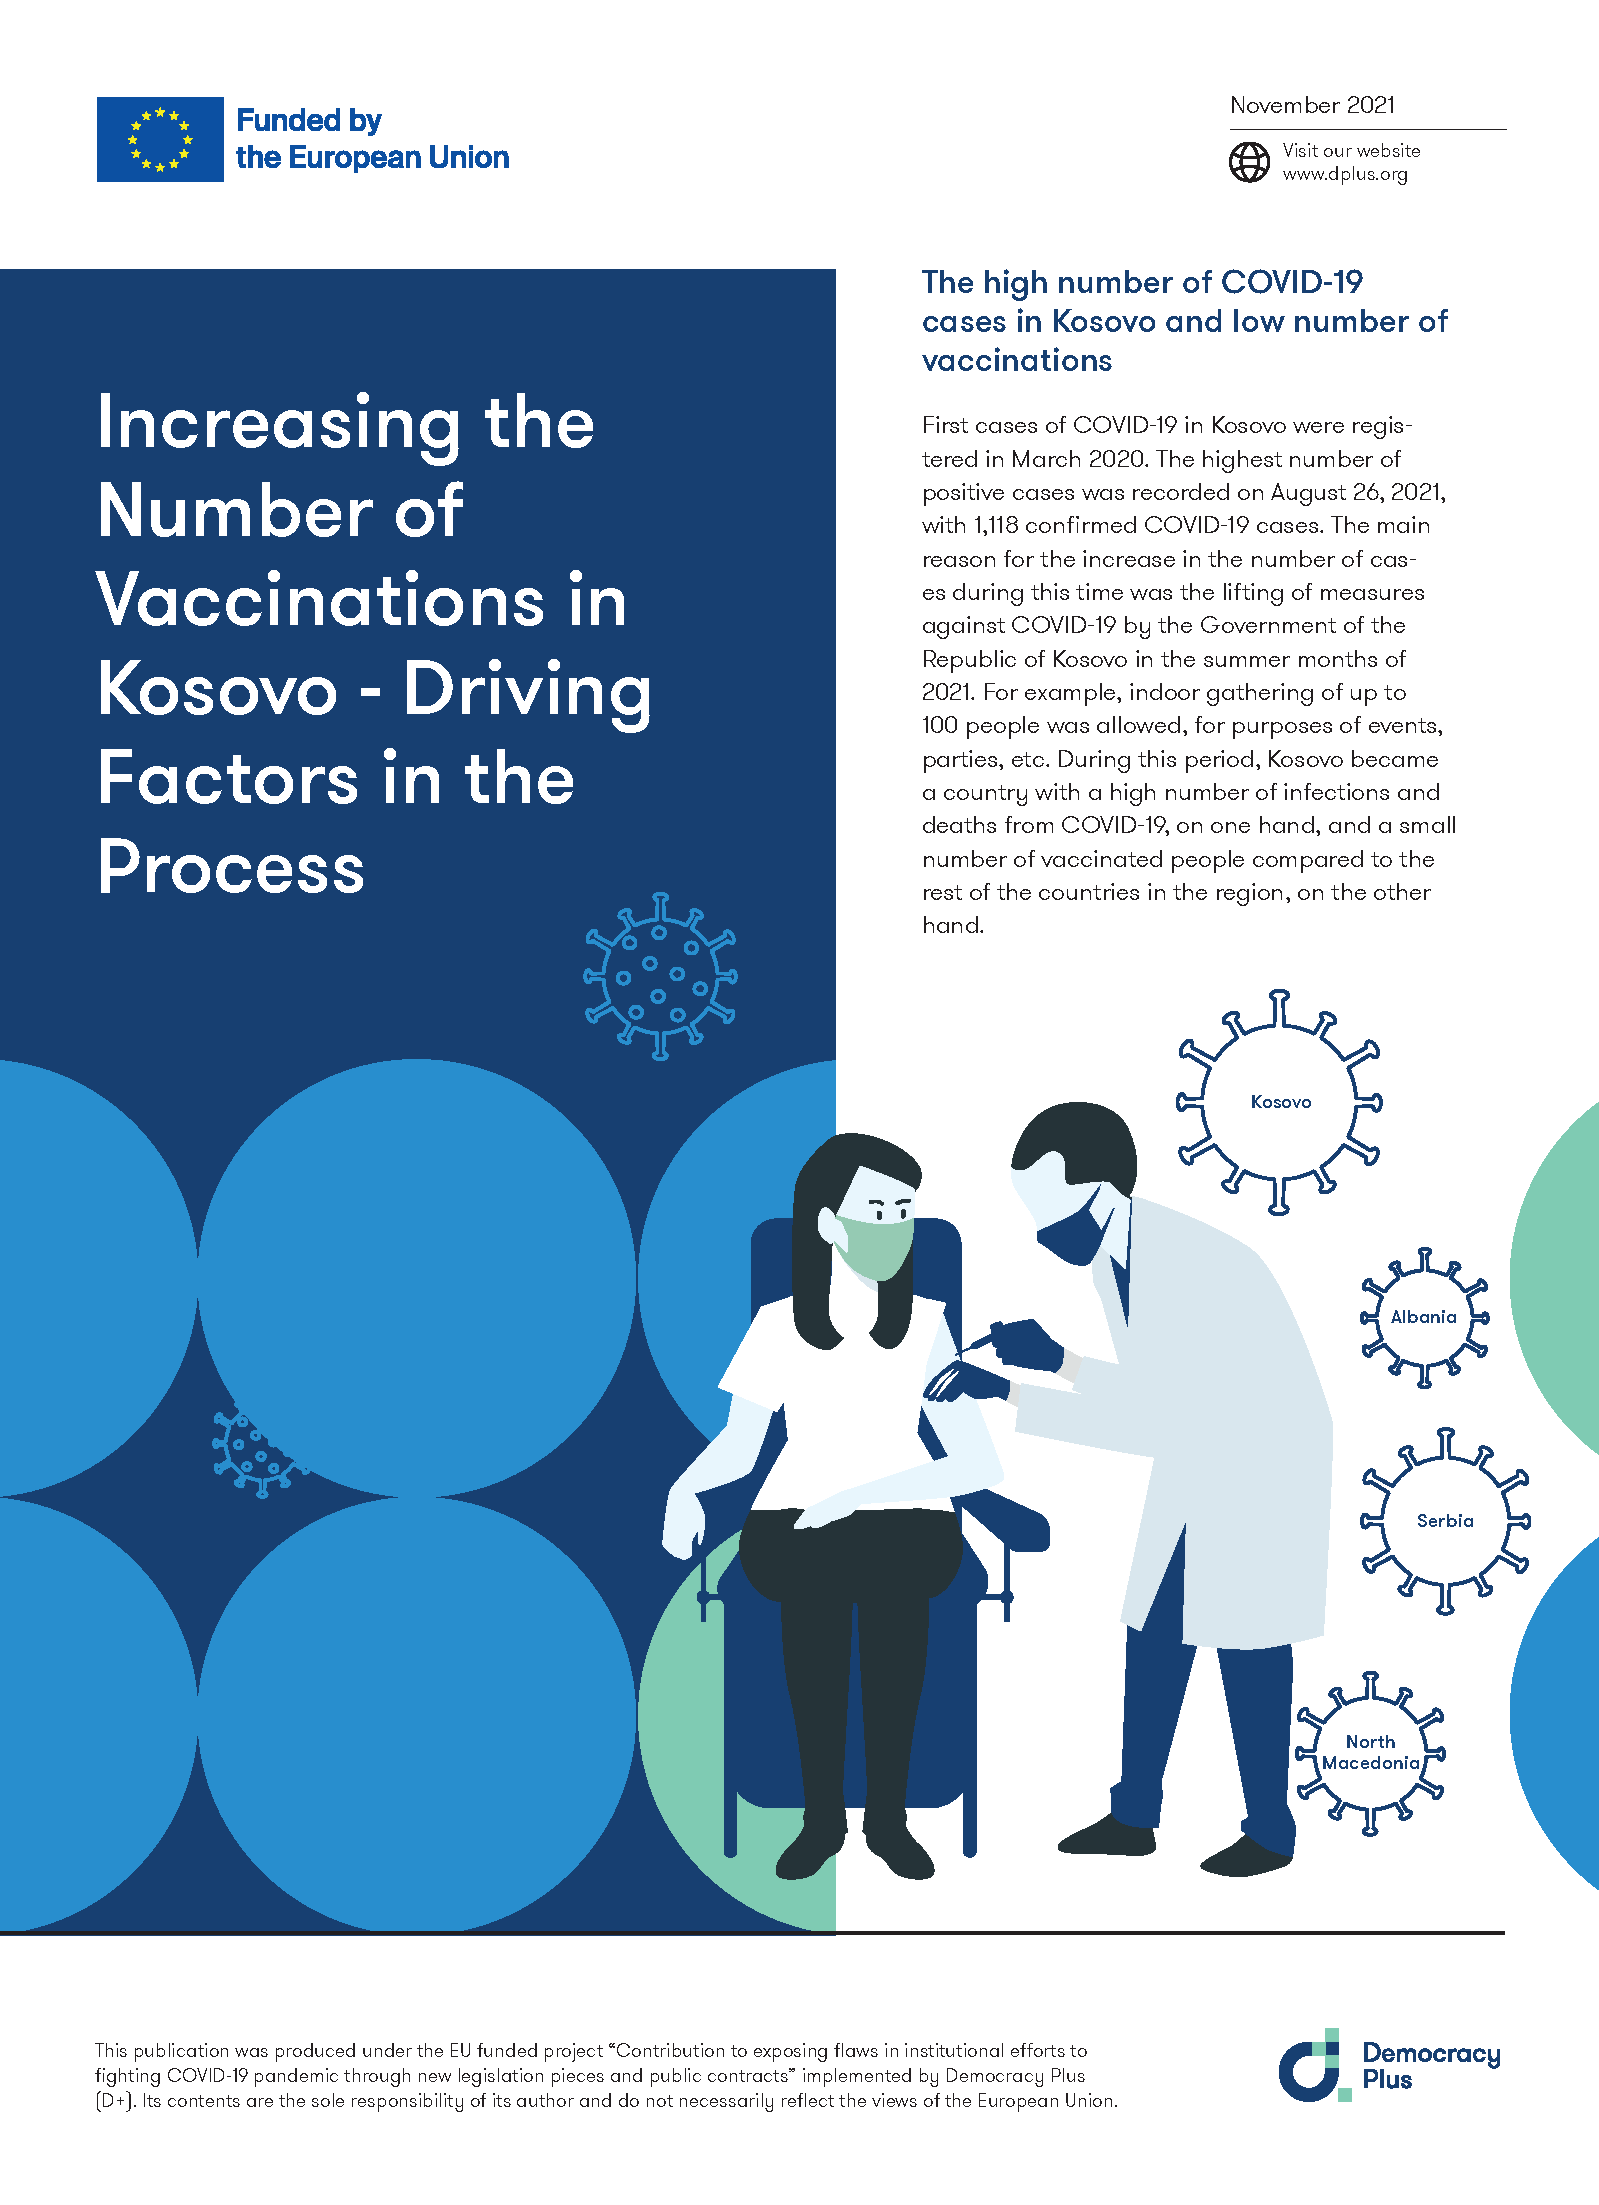 Increasing the Number of Vaccinations in Kosovo – Driving Factors in the Process